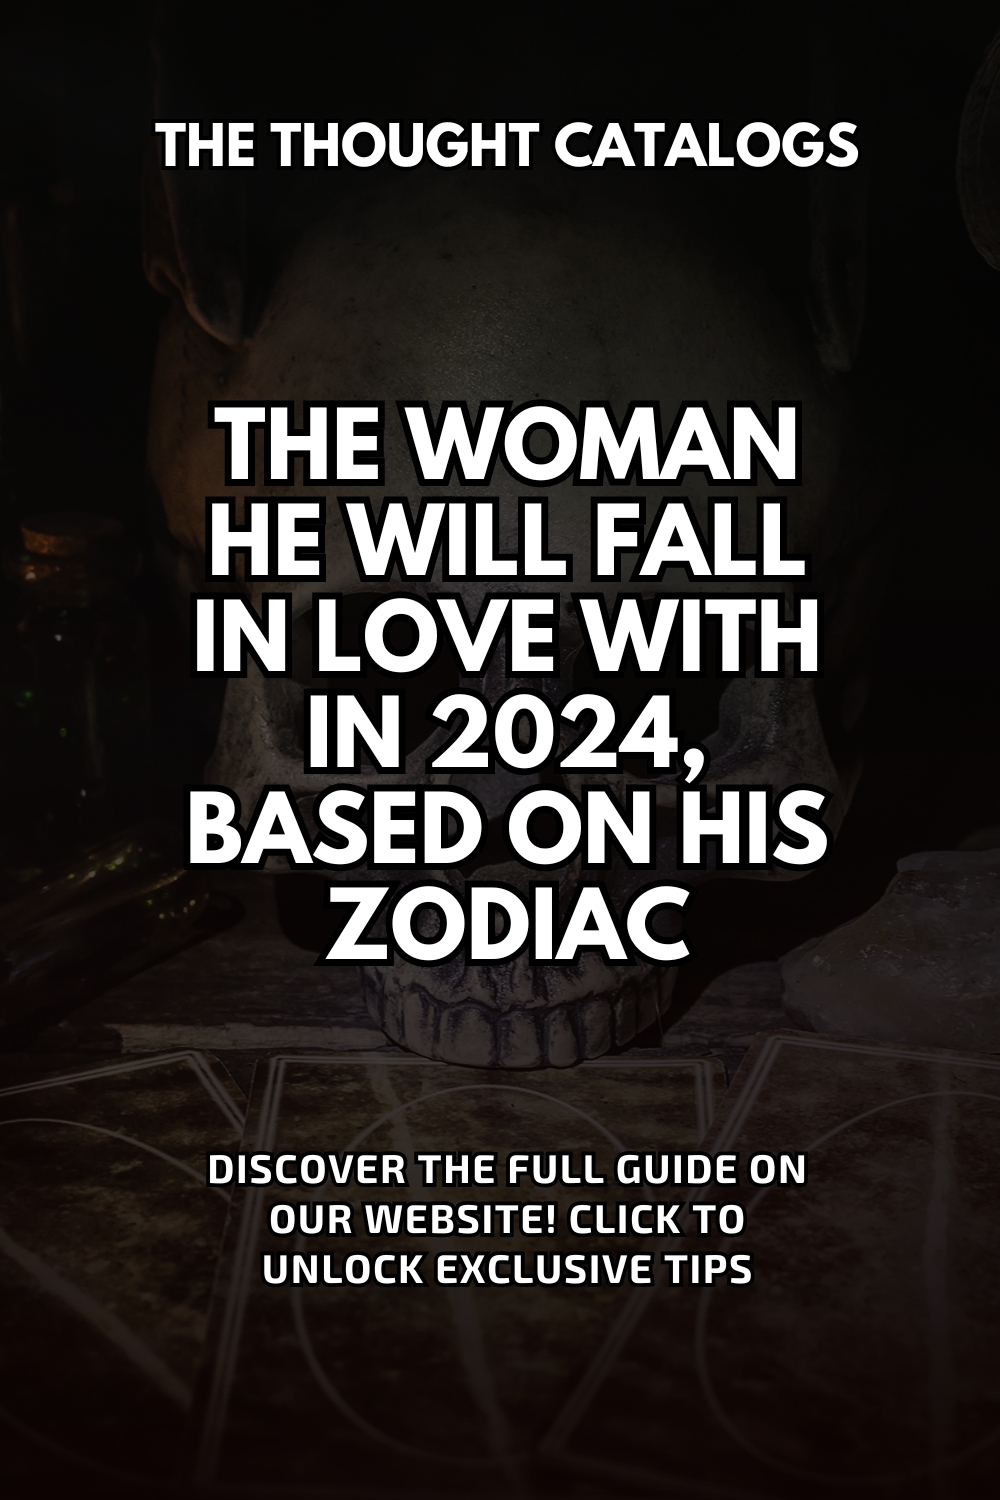 The Woman He Will Fall In Love With In 2024, Based On His Zodiac